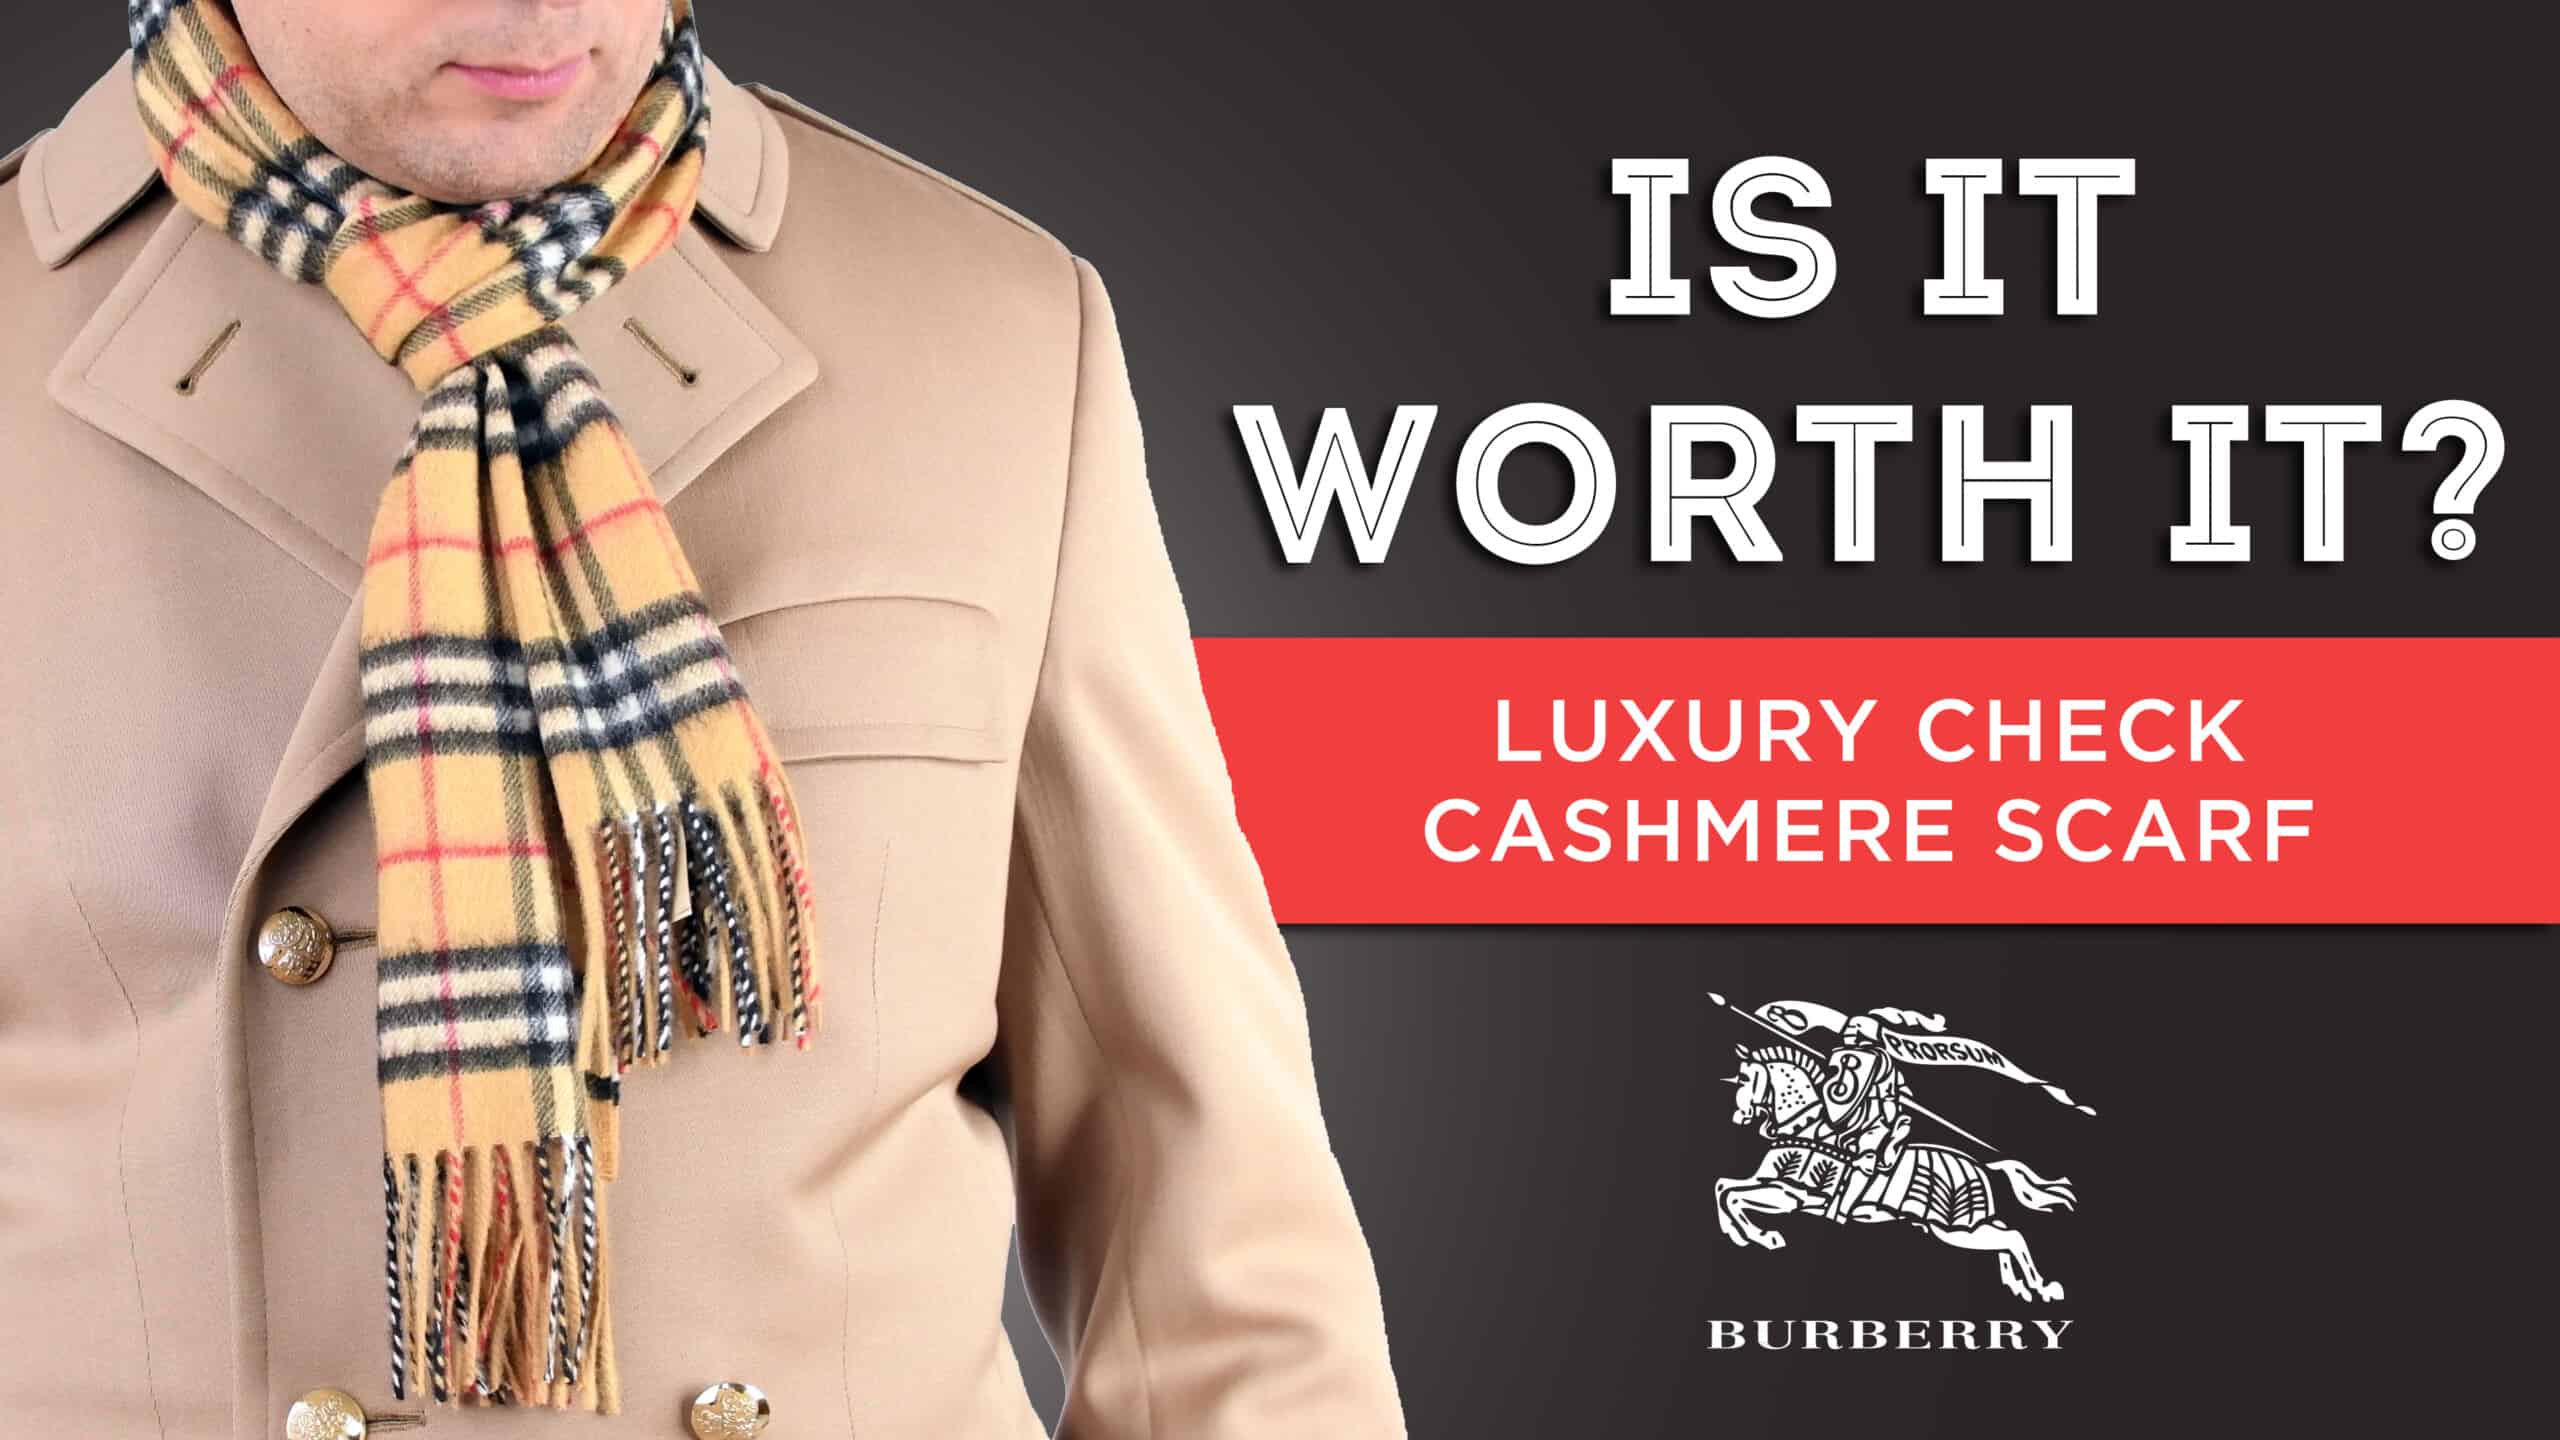 Burberry Is It Worth It? - Check Cashmere Scarf